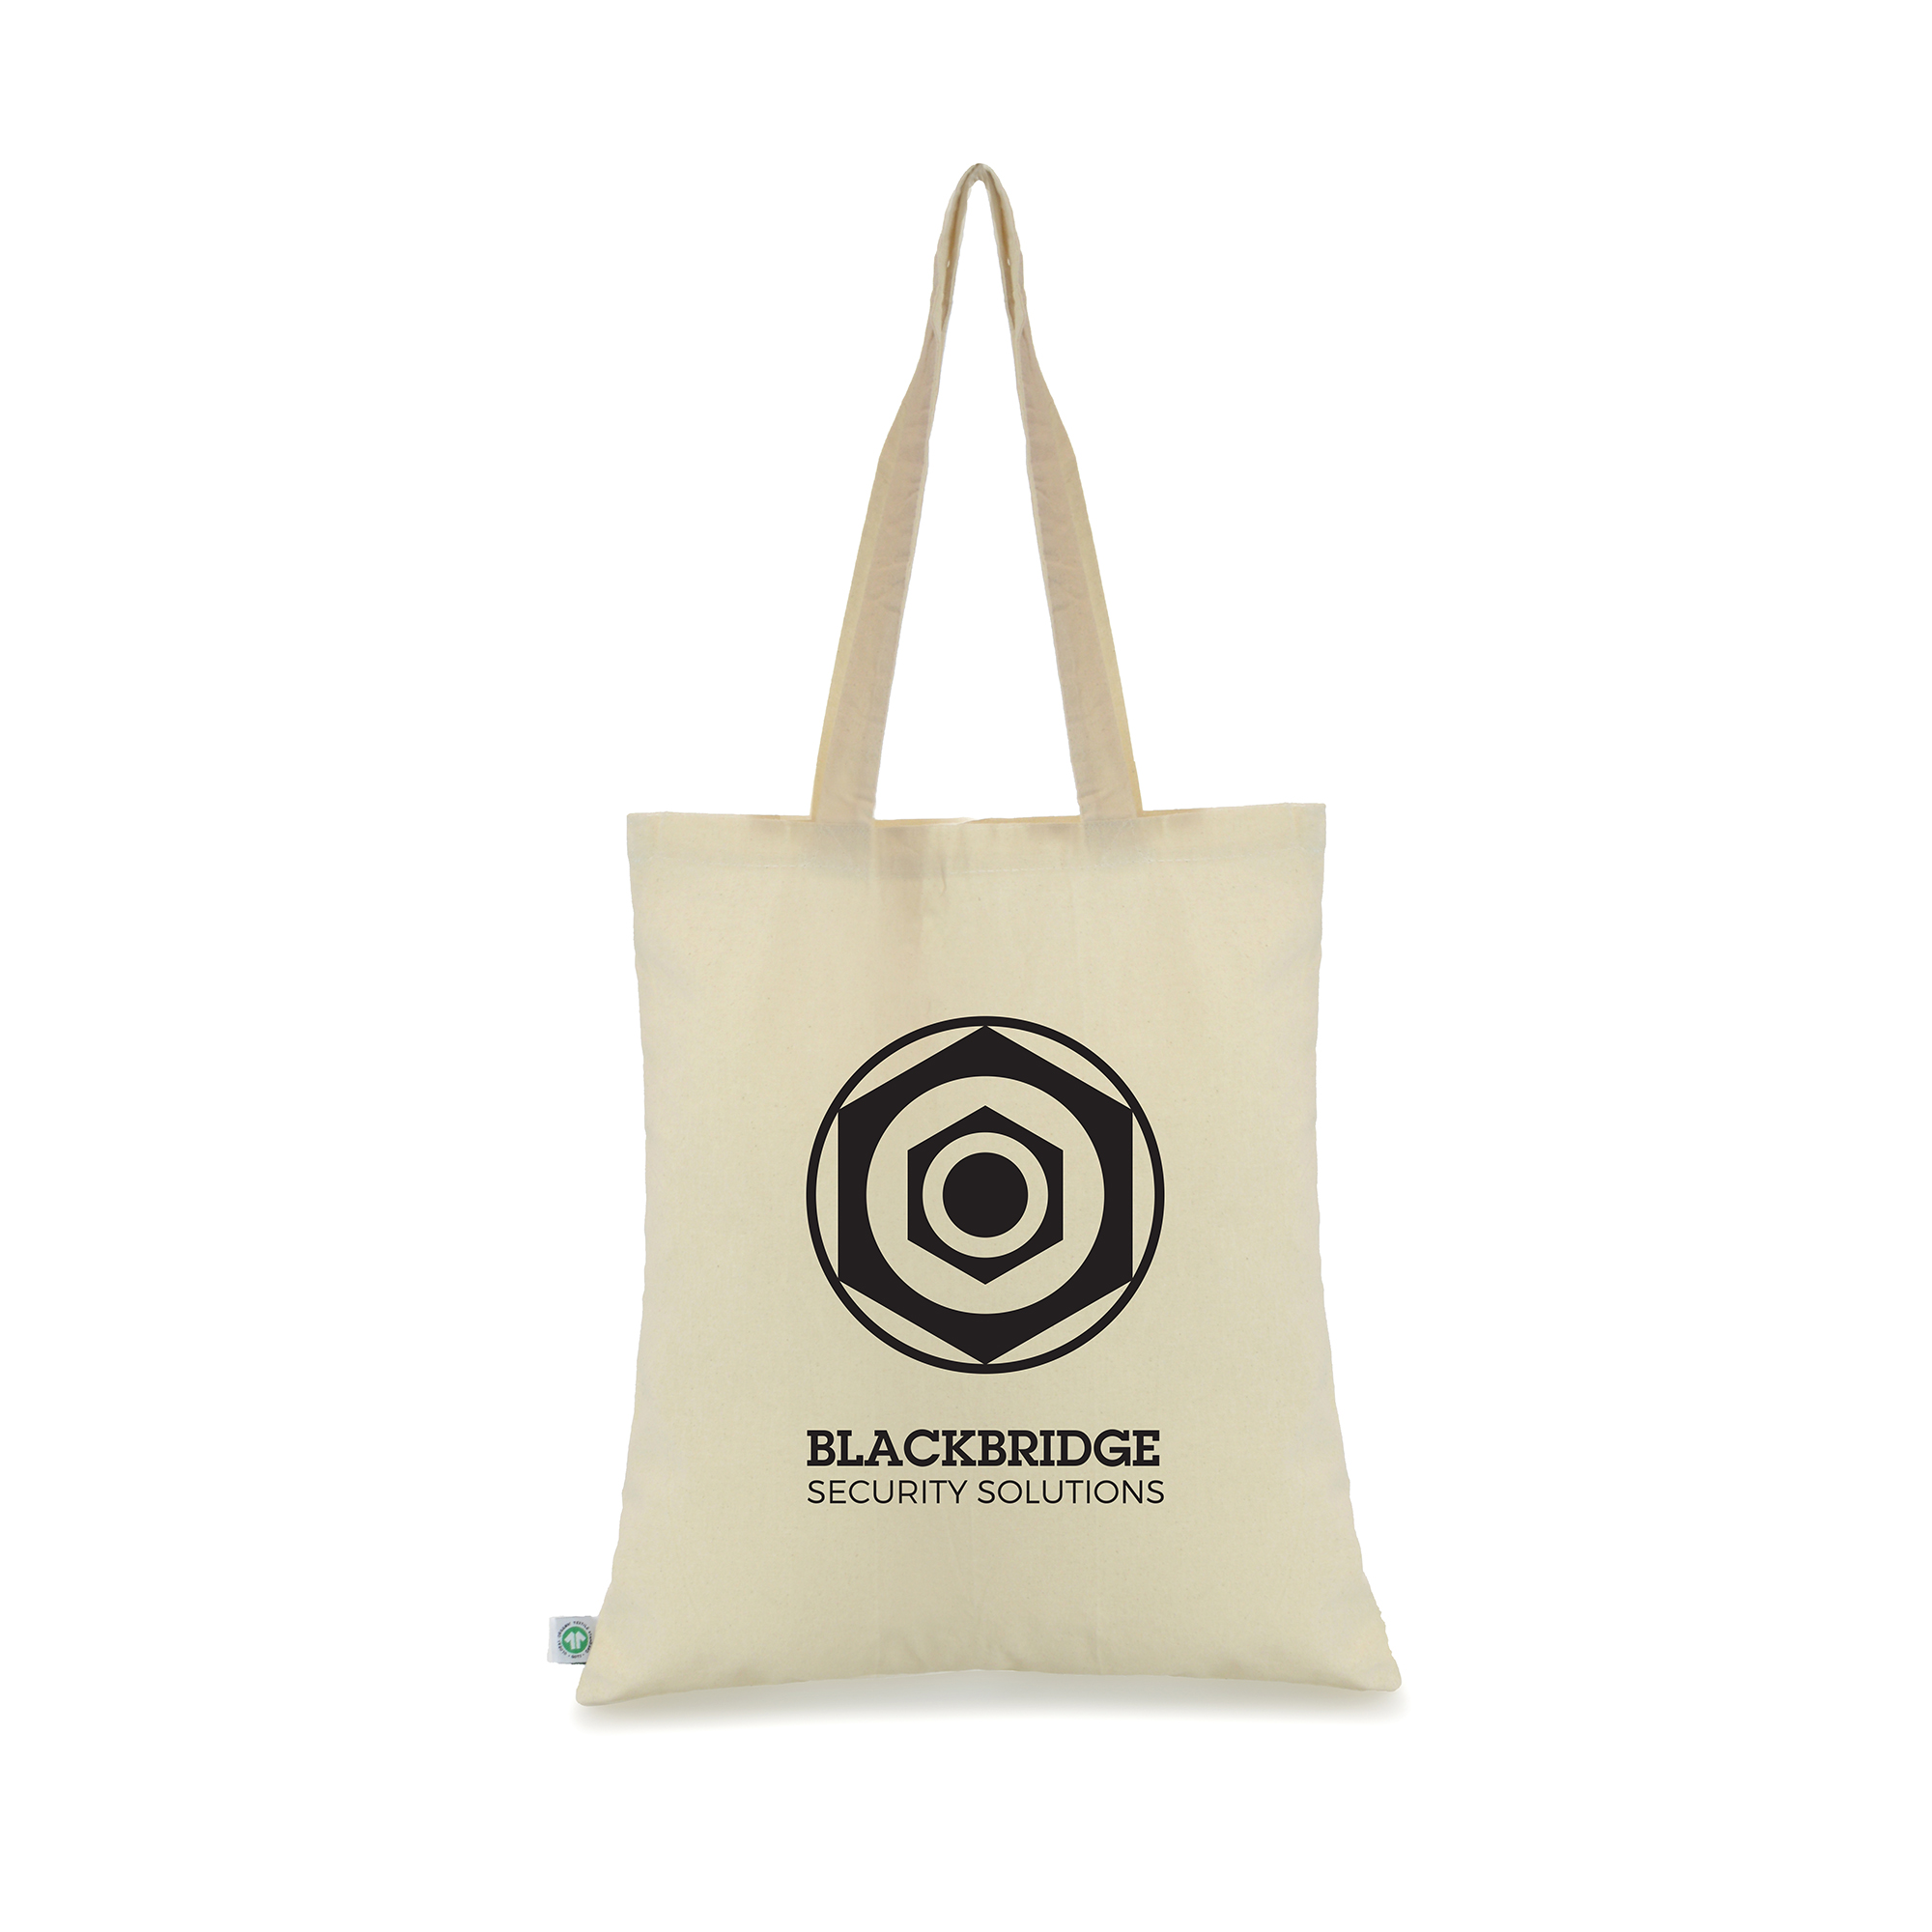 100% organic cotton 7oz shopper with long handles and a large branding area to show off your branding.